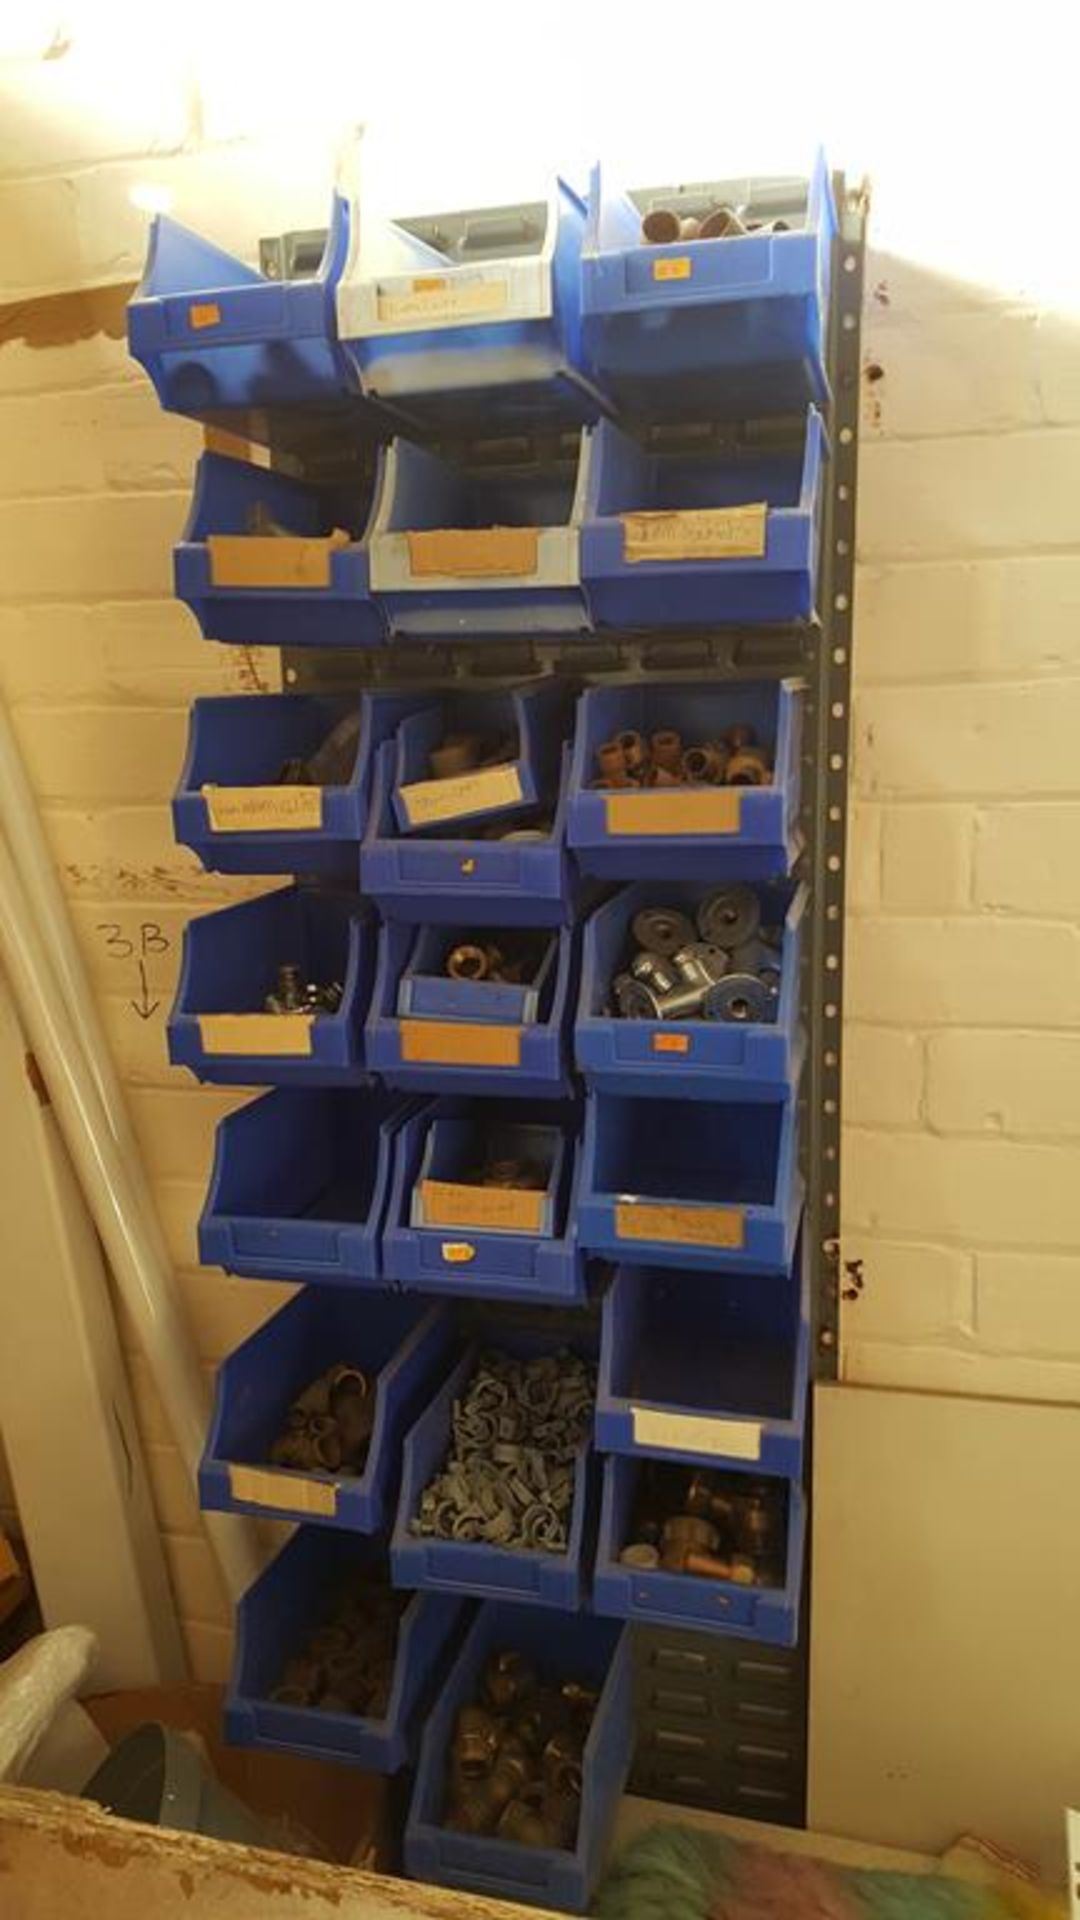 3x Maxi bin storage racks with maxi bits and contents